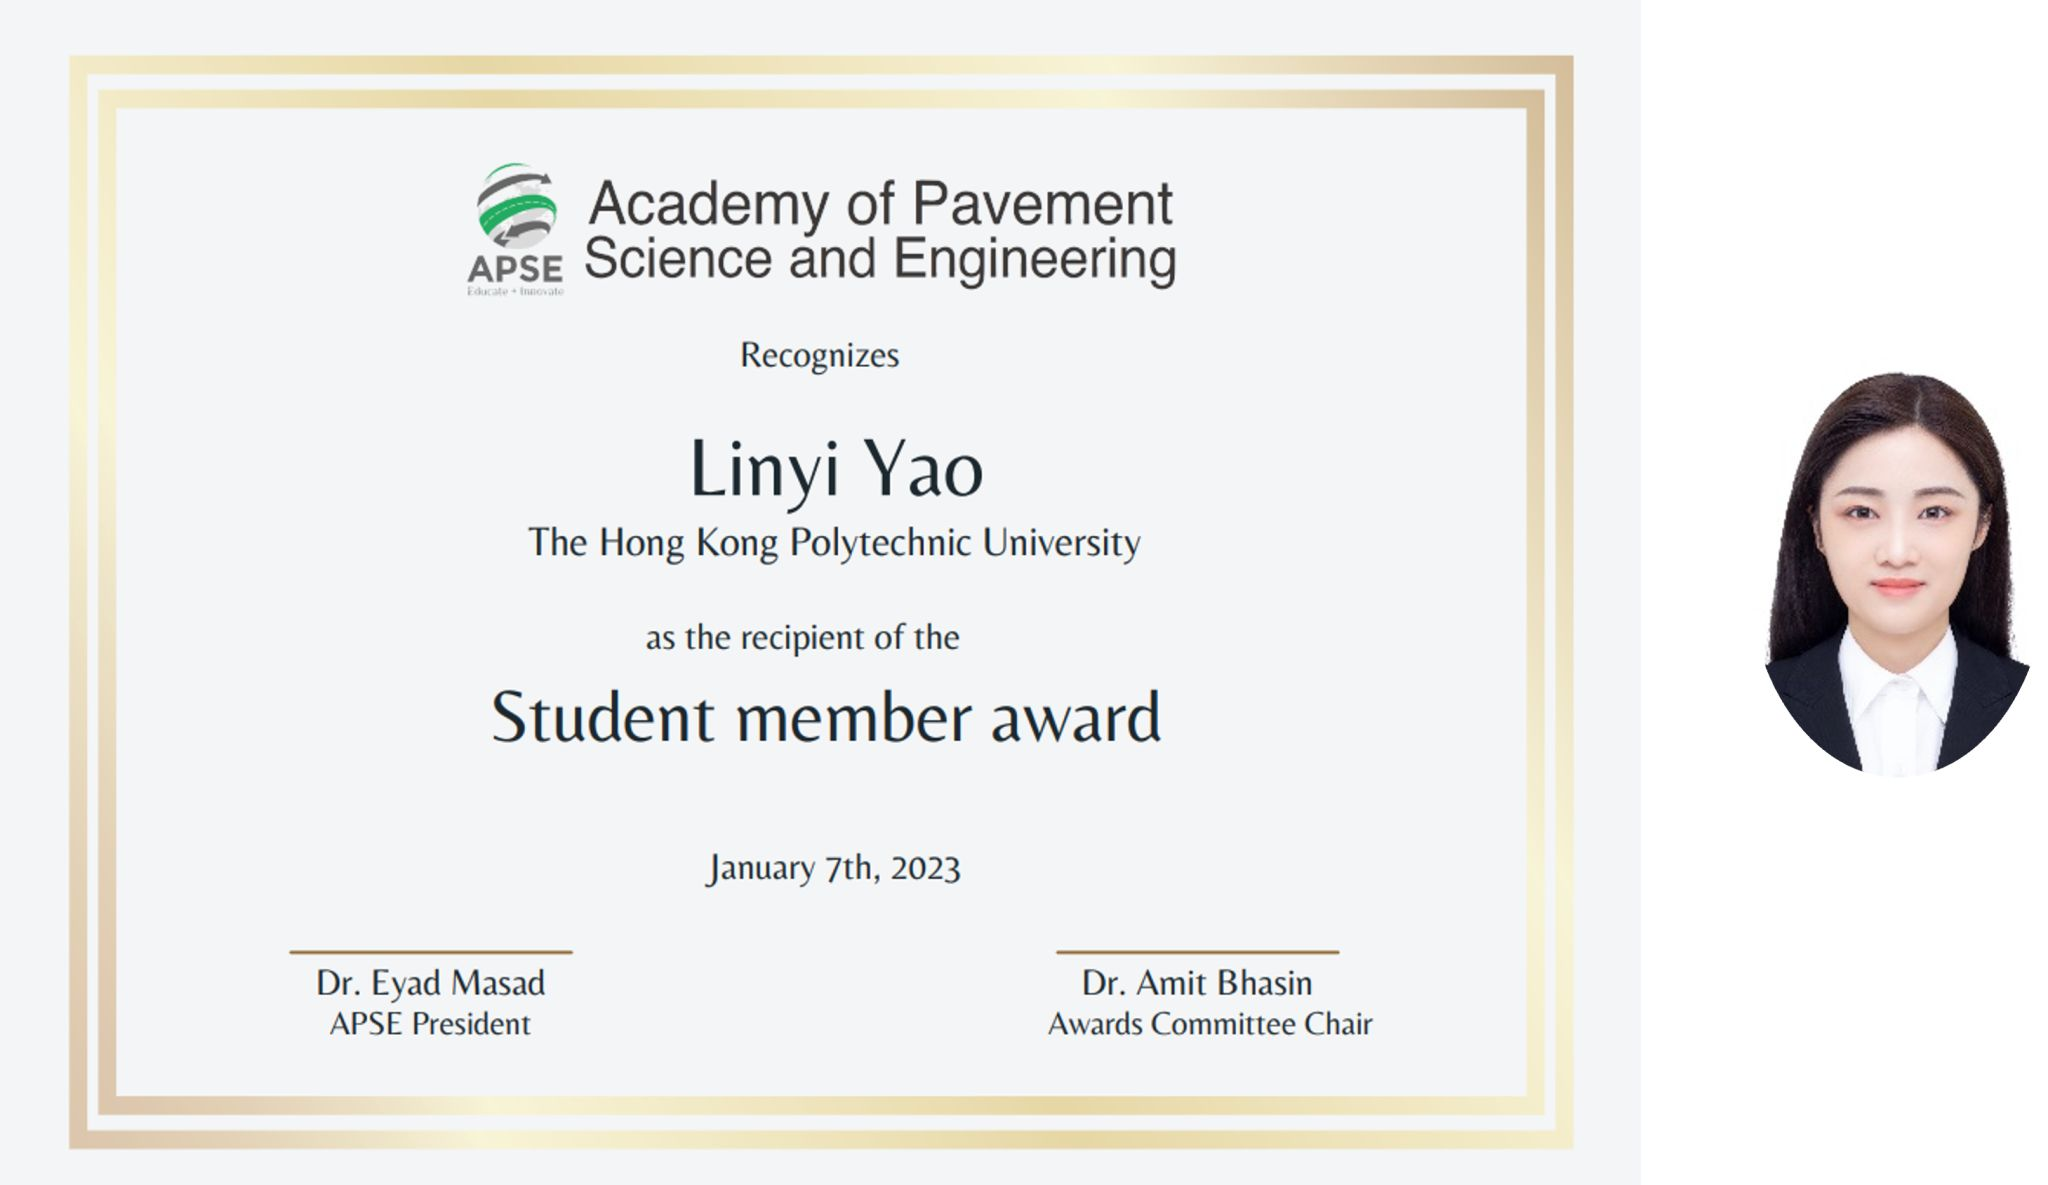 Ms. Linyi Yao and Dr. Siqi Wang received distinguished APSE awards